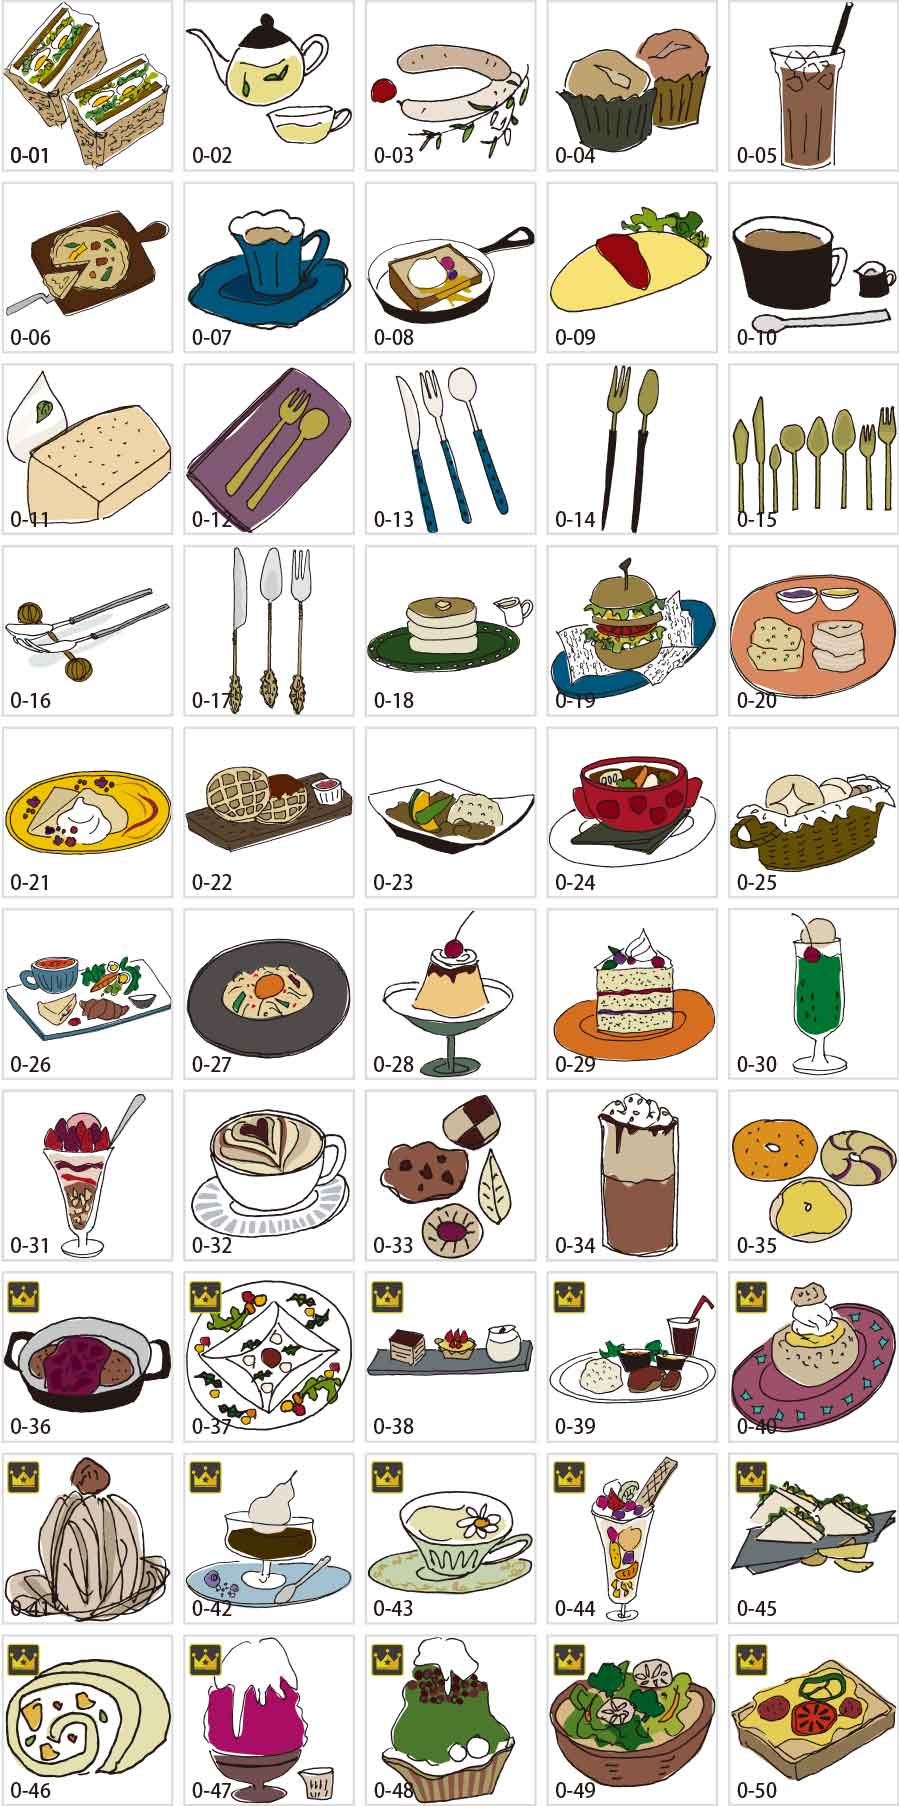 Meals and cutlery illustrations